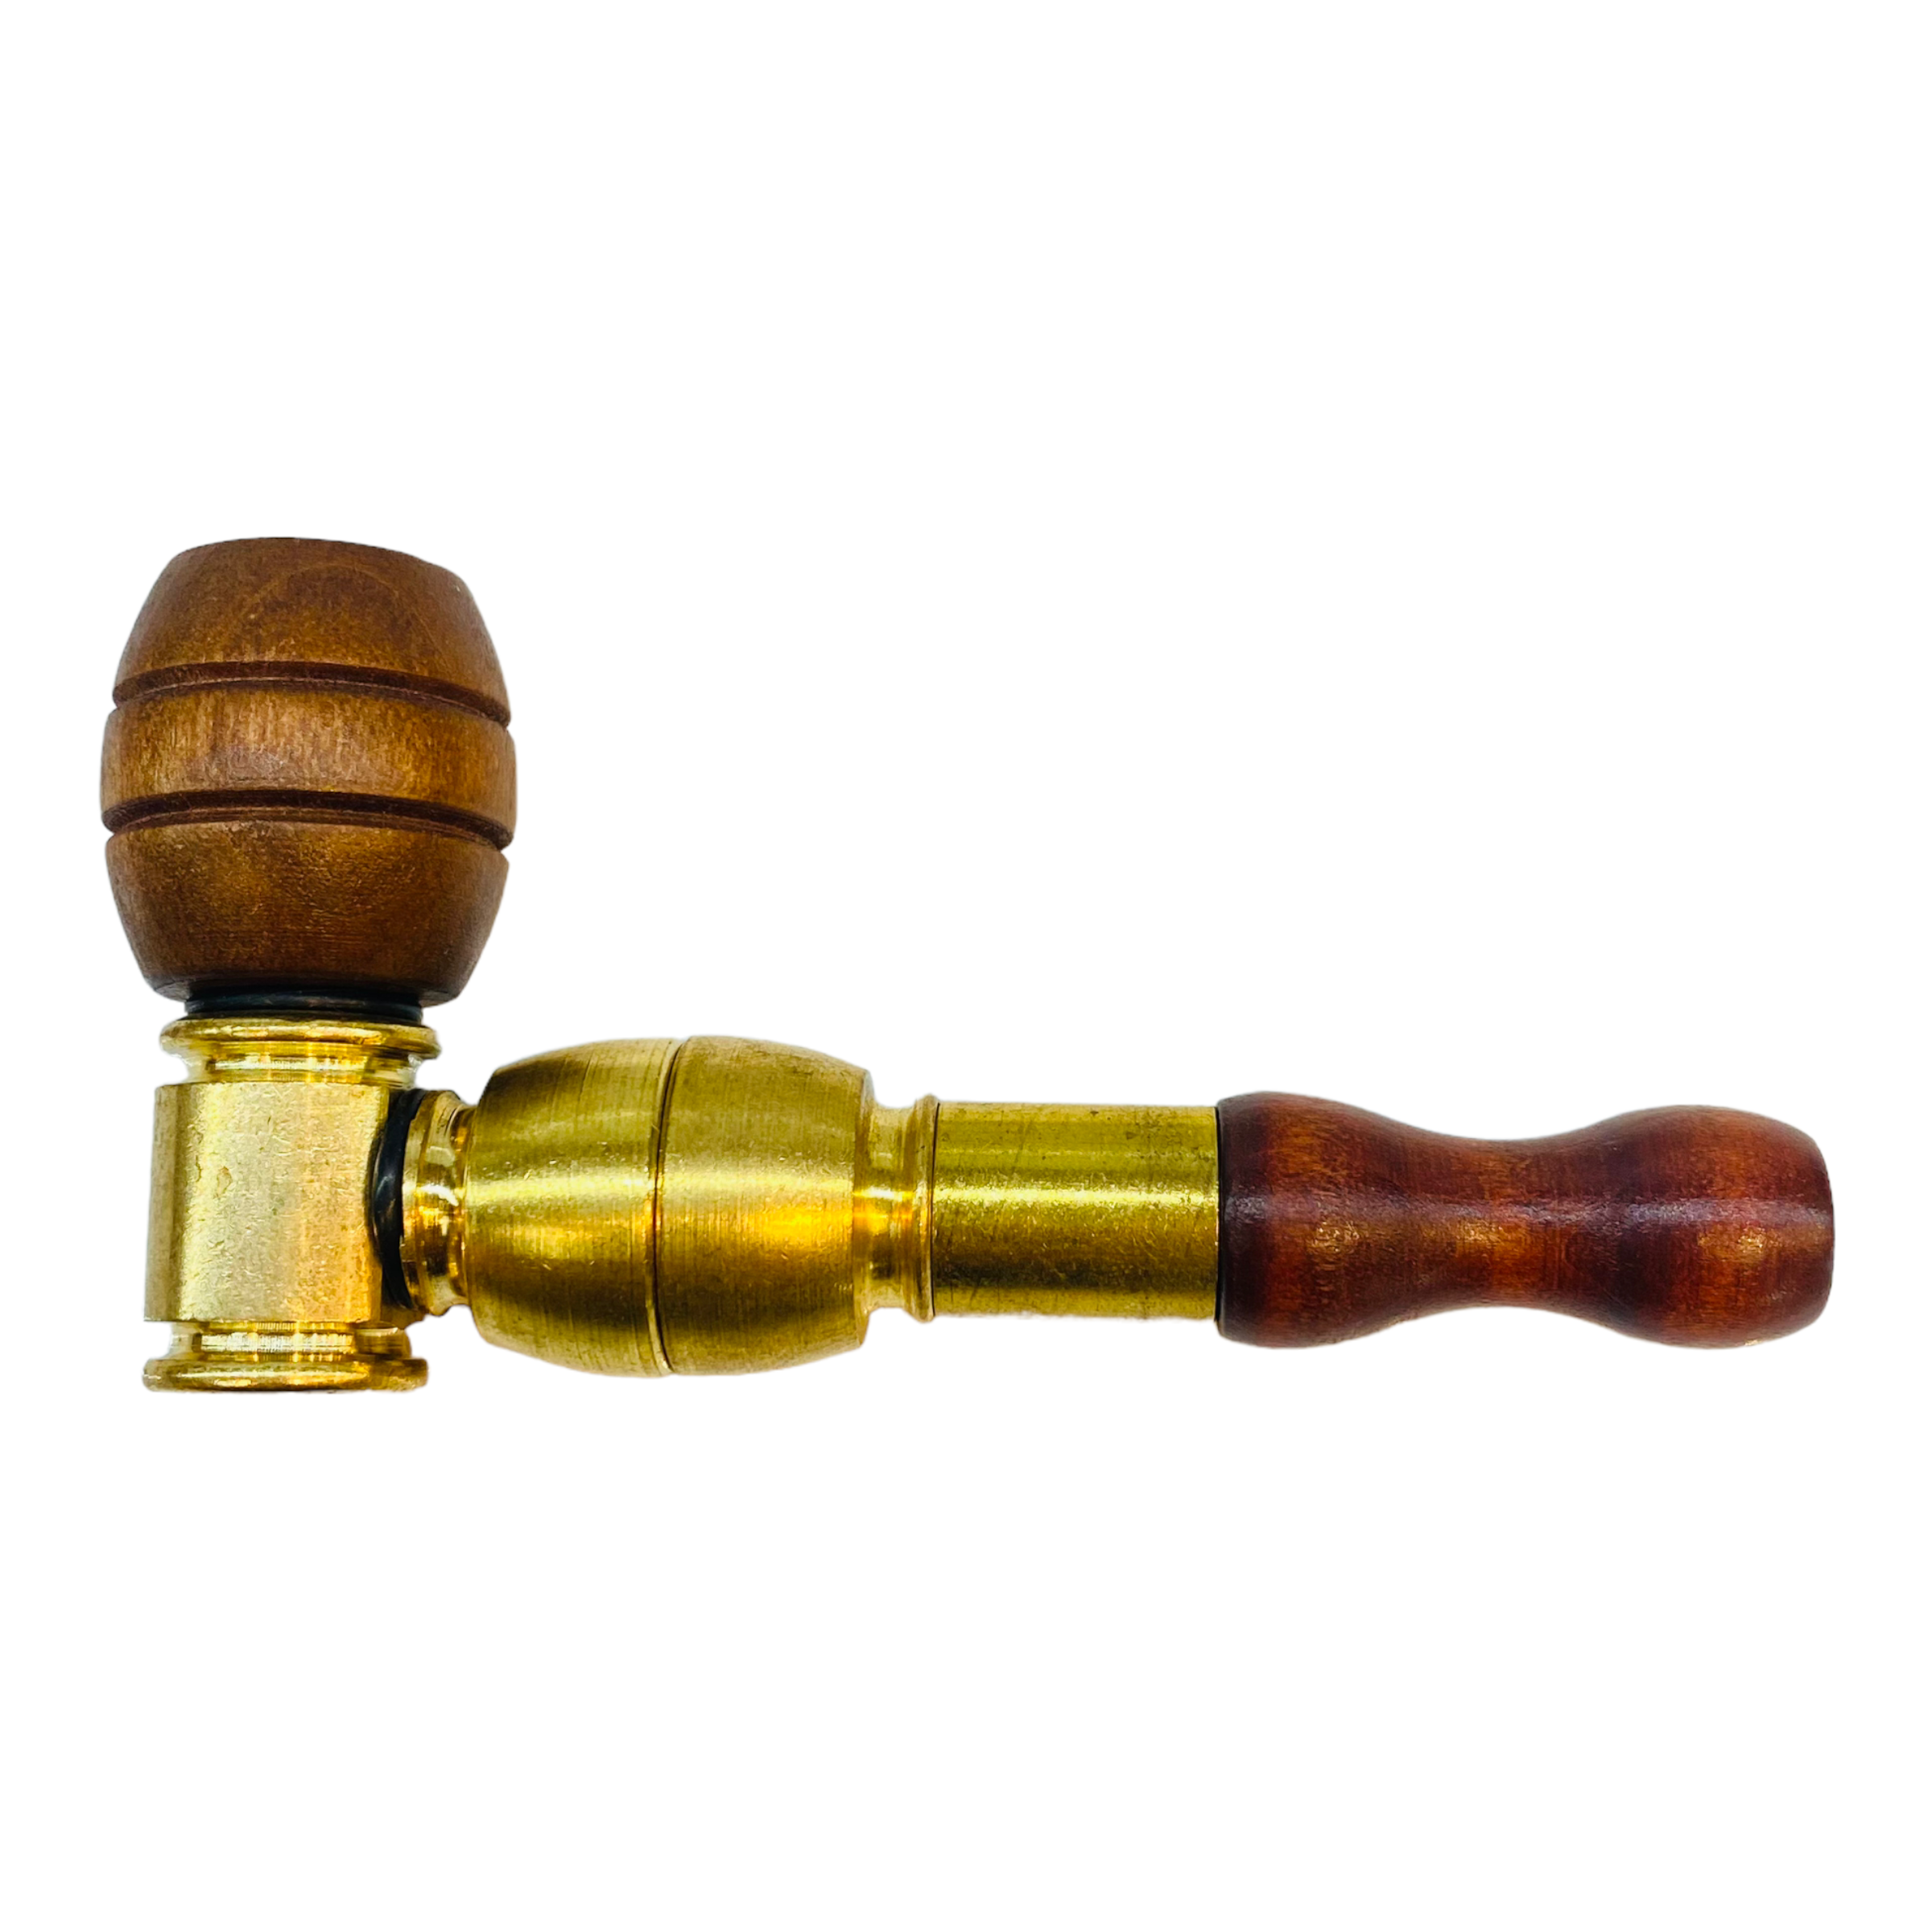 Metal Hand Pipes - Brass Pipe With Wood Bowl And Mouthpiece